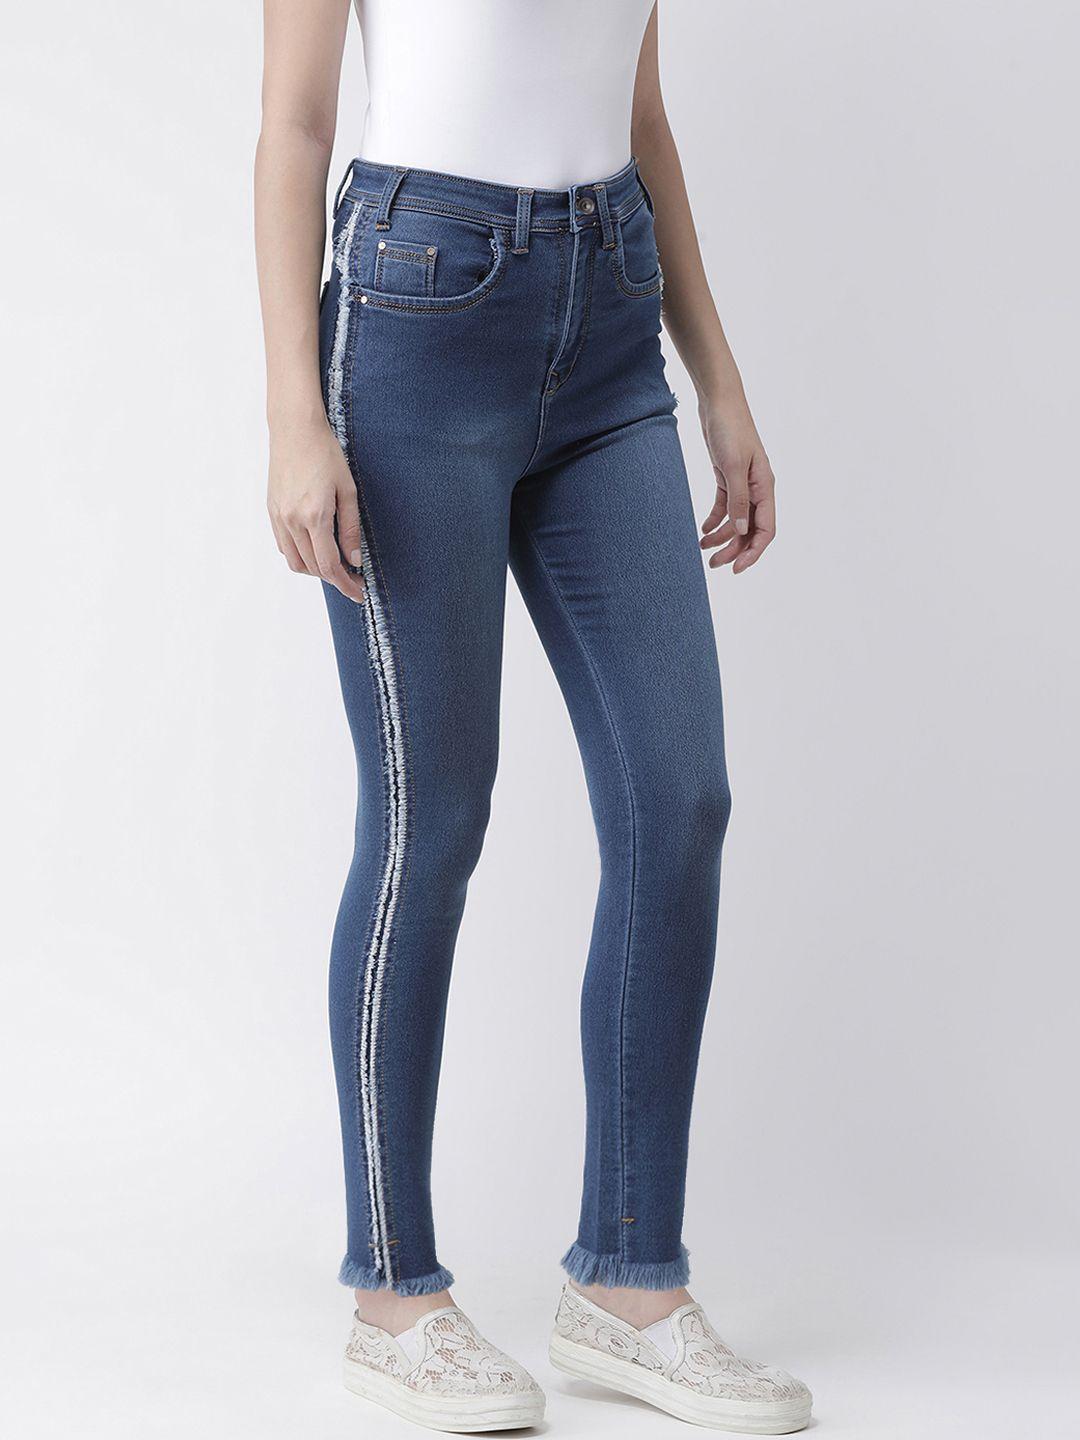 kassually-women-navy-blue-skinny-fit-mid-rise-clean-look-jeans-with-side-stripes